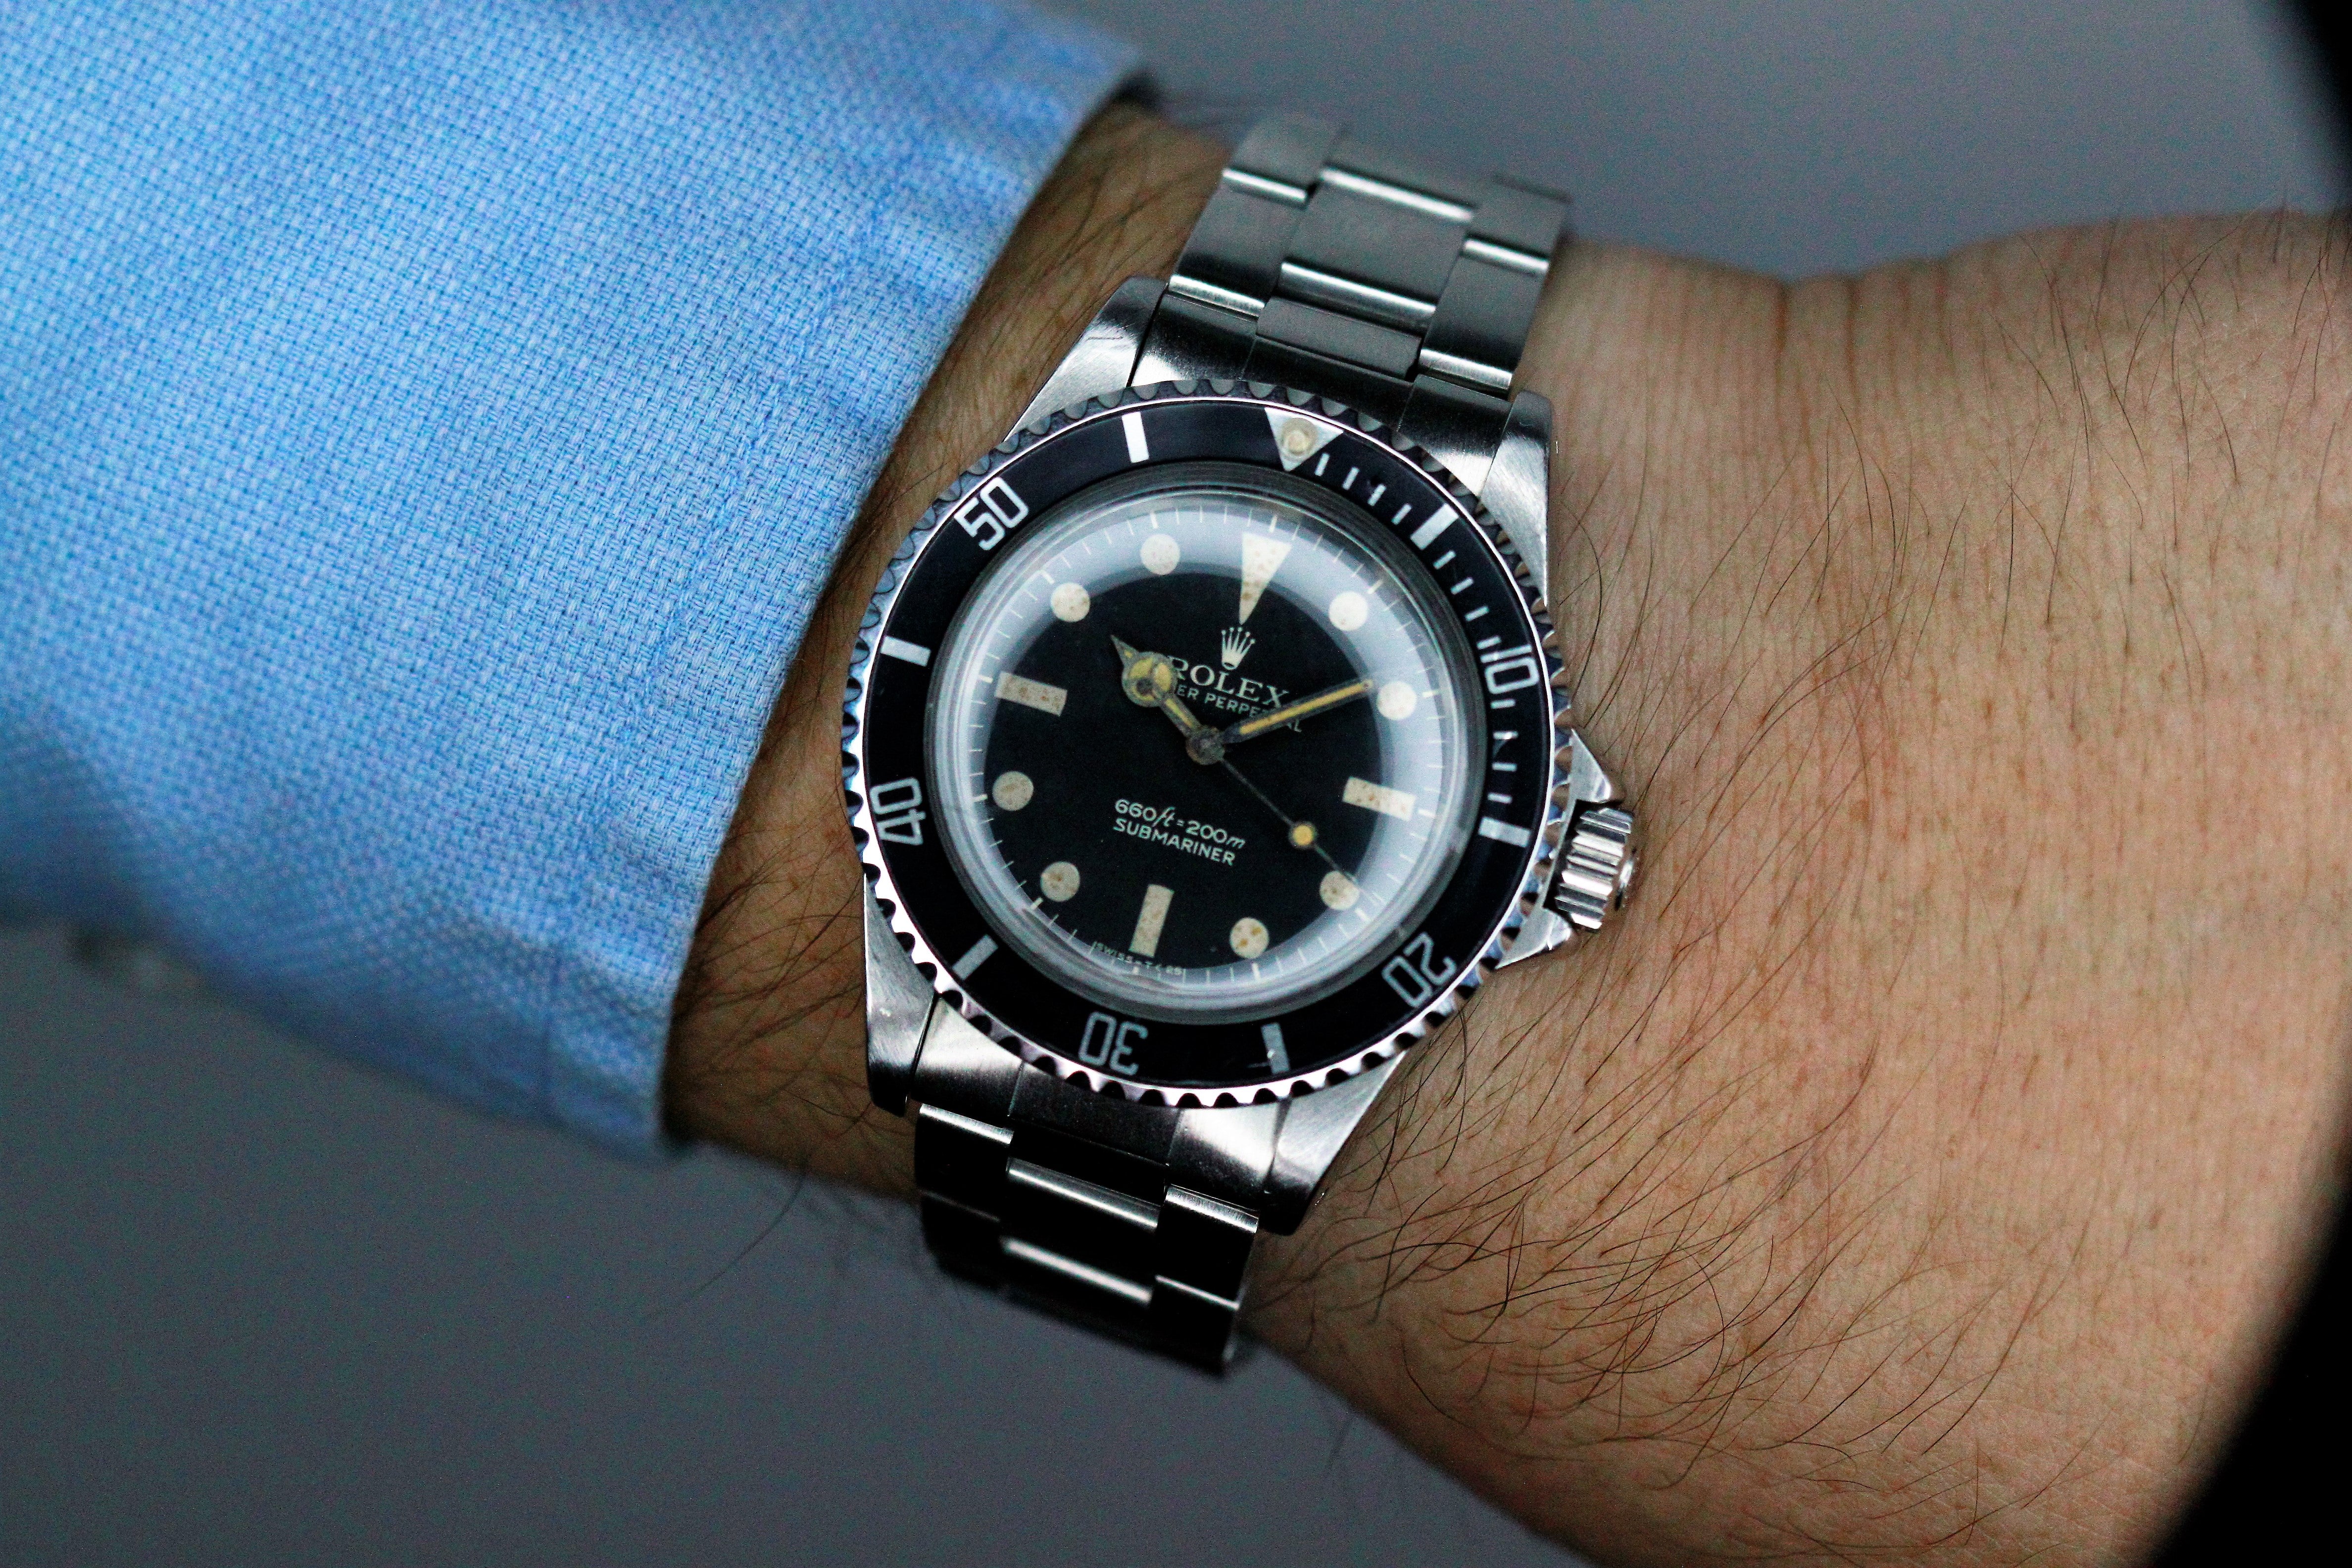 Rolex Oyster Perpetual Submariner Ref.5513 with Maxi Dial MK1